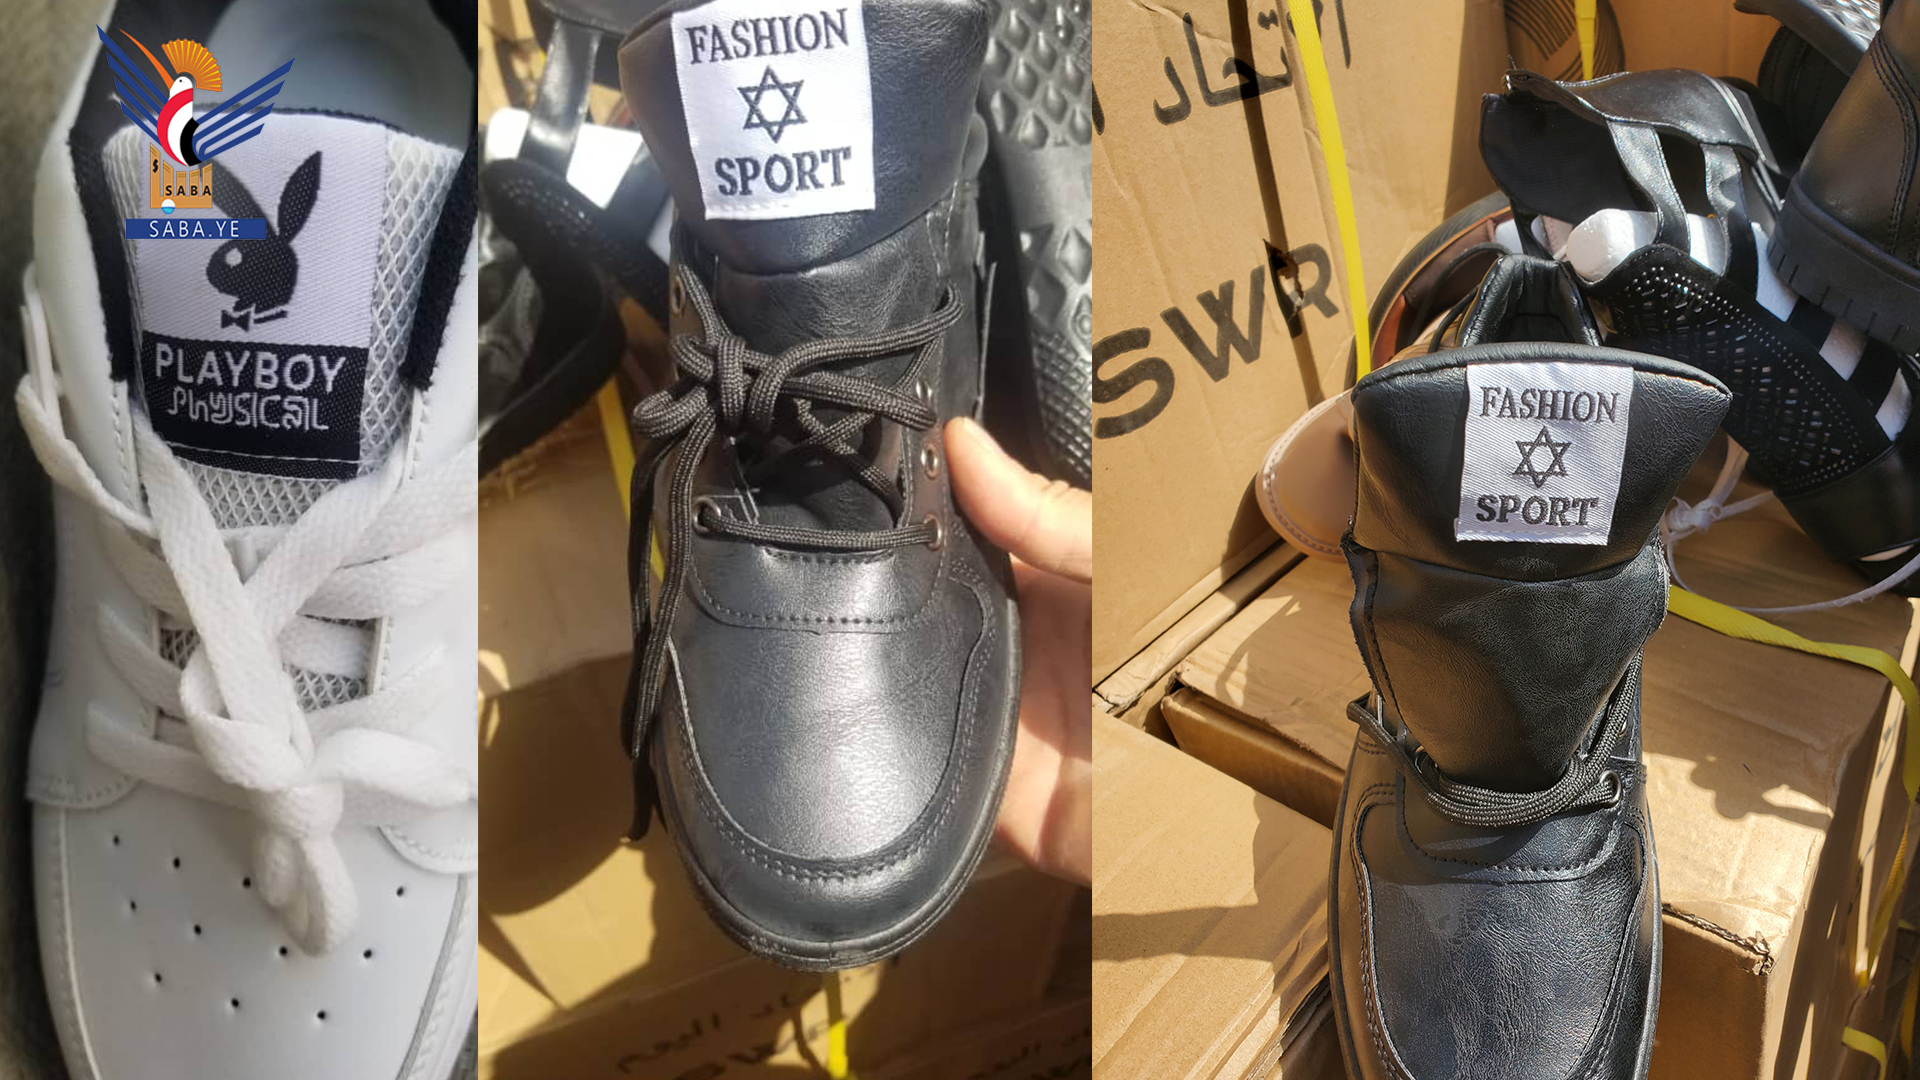 Afar Customs Center seizes quantity of boots bearing Zionist six-pointed star